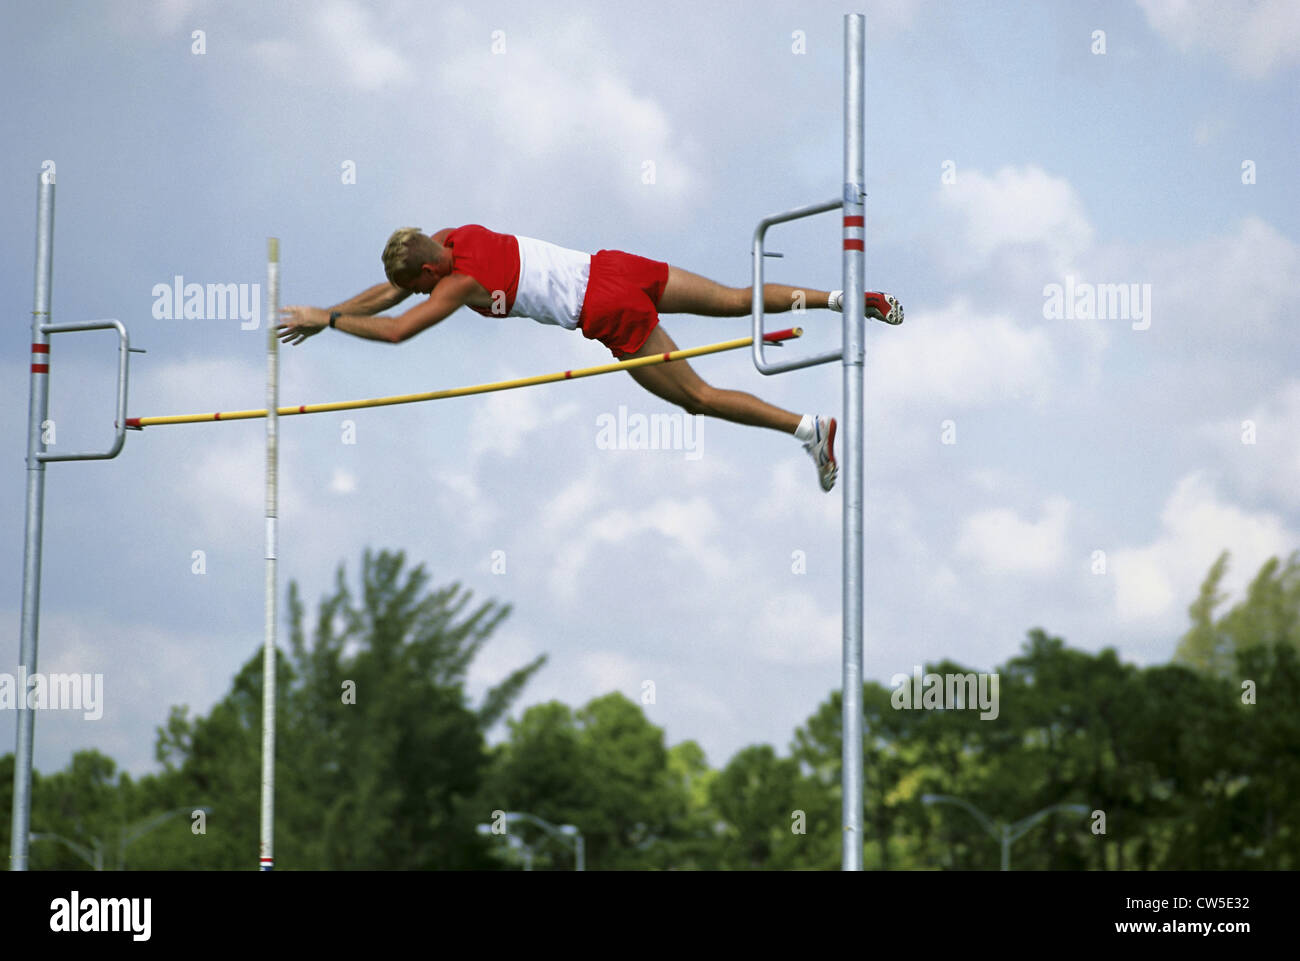 Low angle view of an athlete pole vaulting Stock Photo